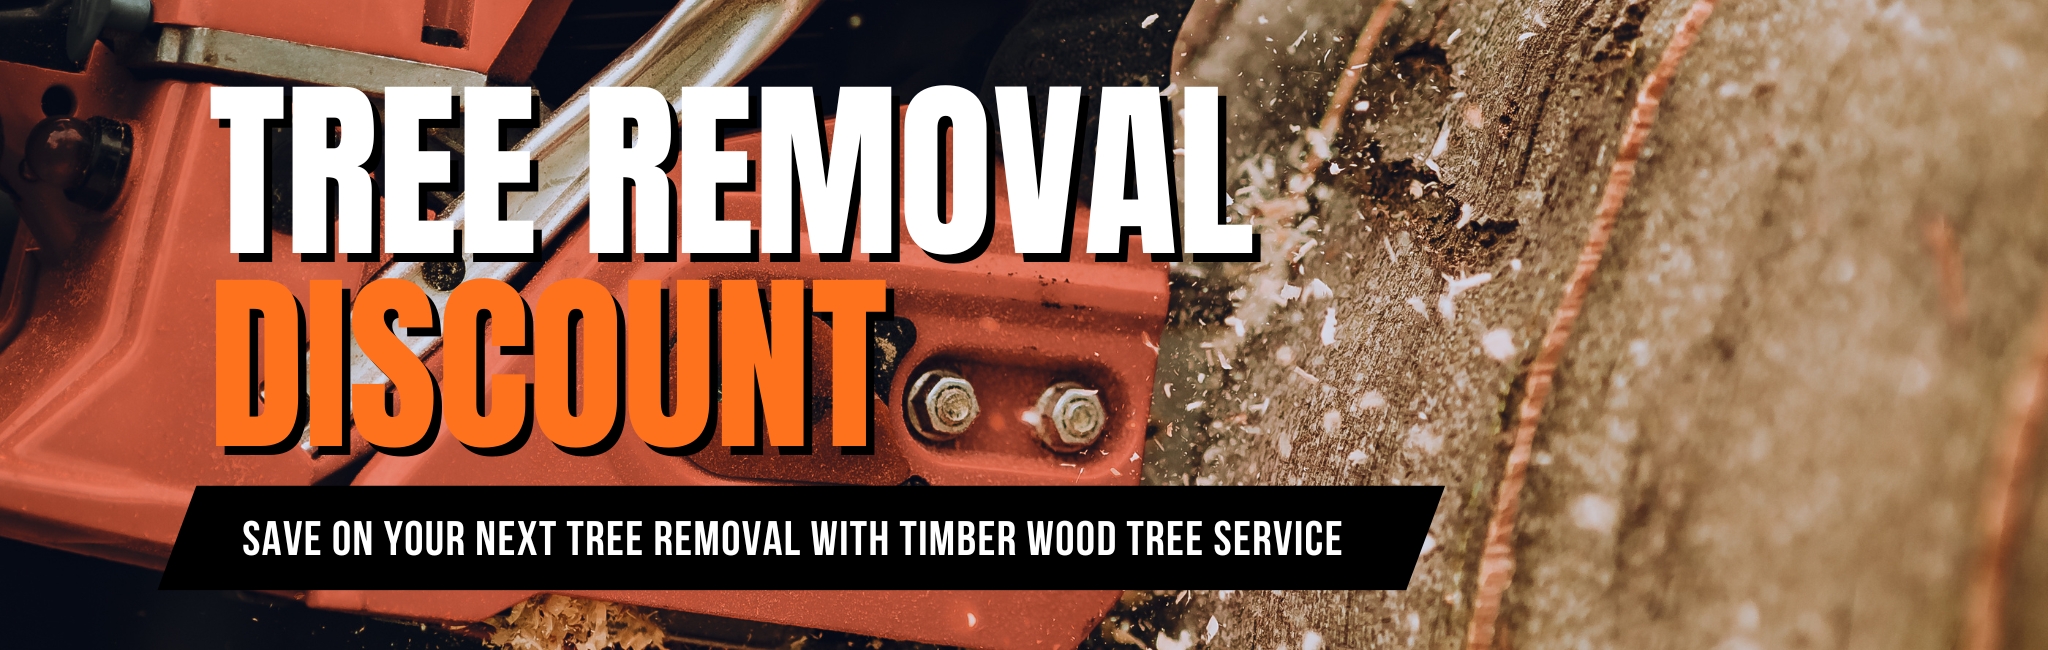 Tree-Removal-Discount